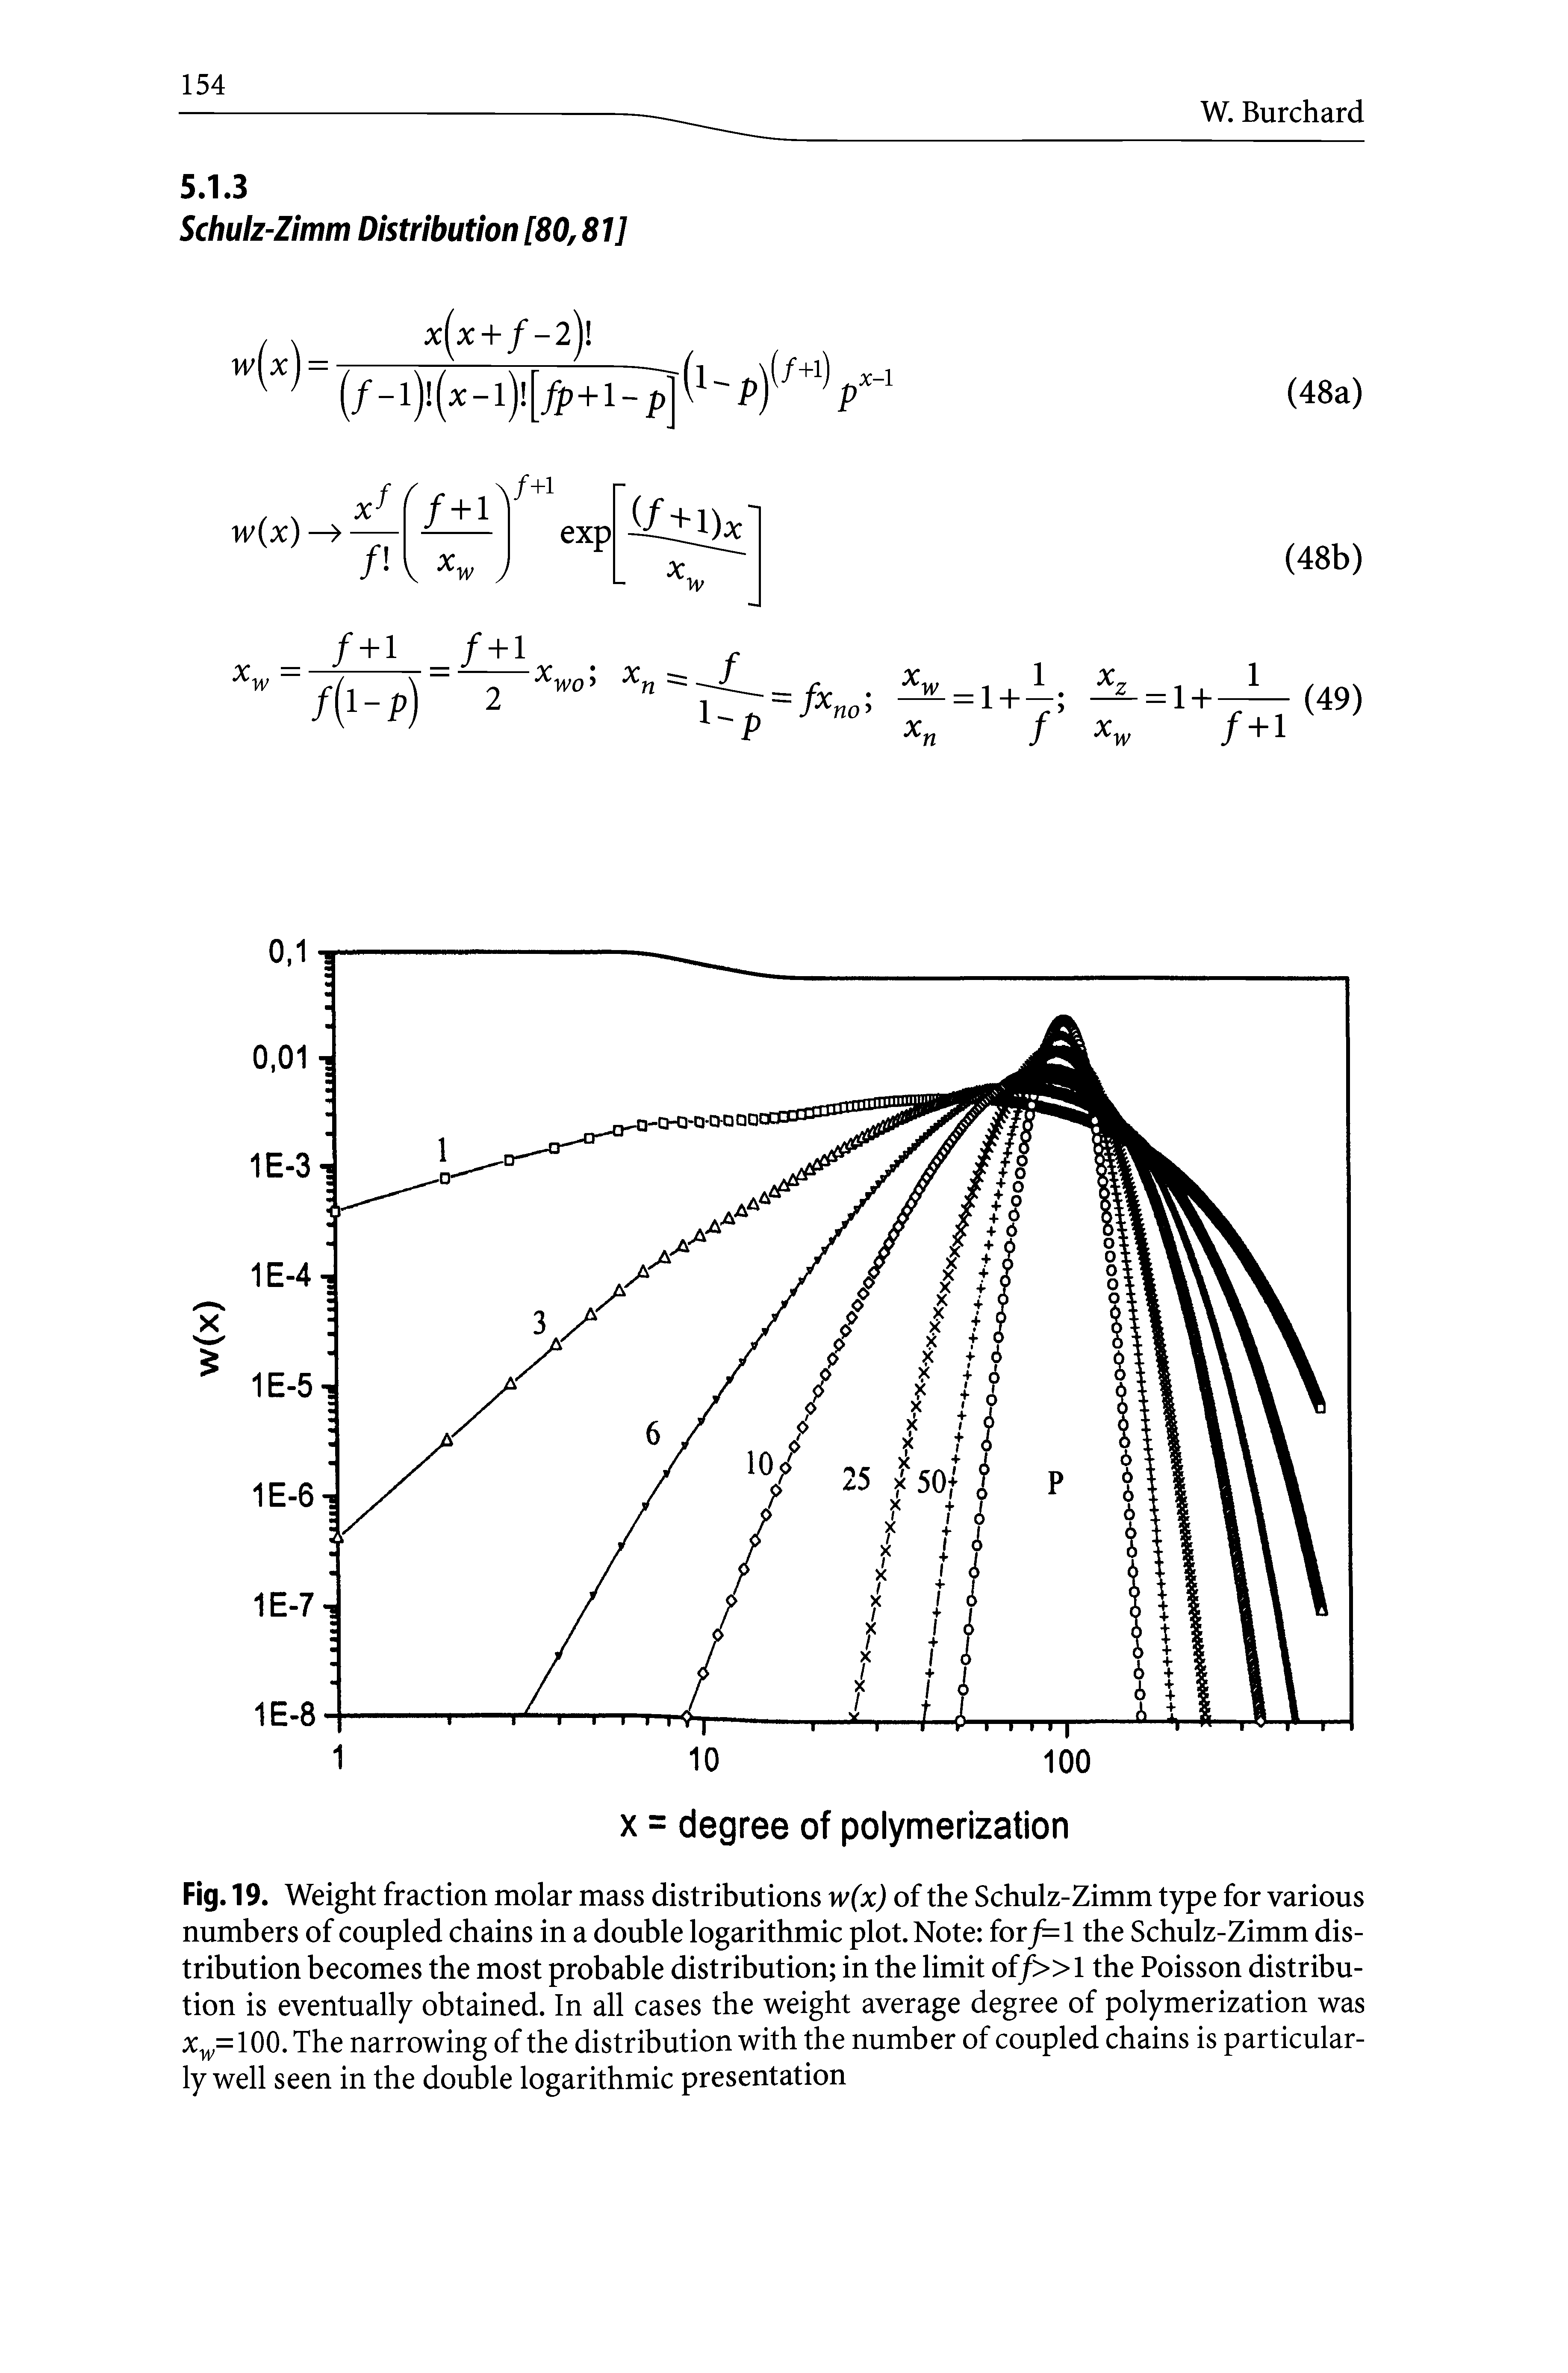 Fig. 19. Weight fraction molar mass distributions w(x) of the Schulz-Zimm type for various numbers of coupled chains in a double logarithmic plot. Note fory=l the Schulz-Zimm distribution becomes the most probable distribution in the limit of/ l the Poisson distribution is eventually obtained. In all cases the weight average degree of polymerization was 100. The narrowing of the distribution with the number of coupled chains is particularly well seen in the double logarithmic presentation...